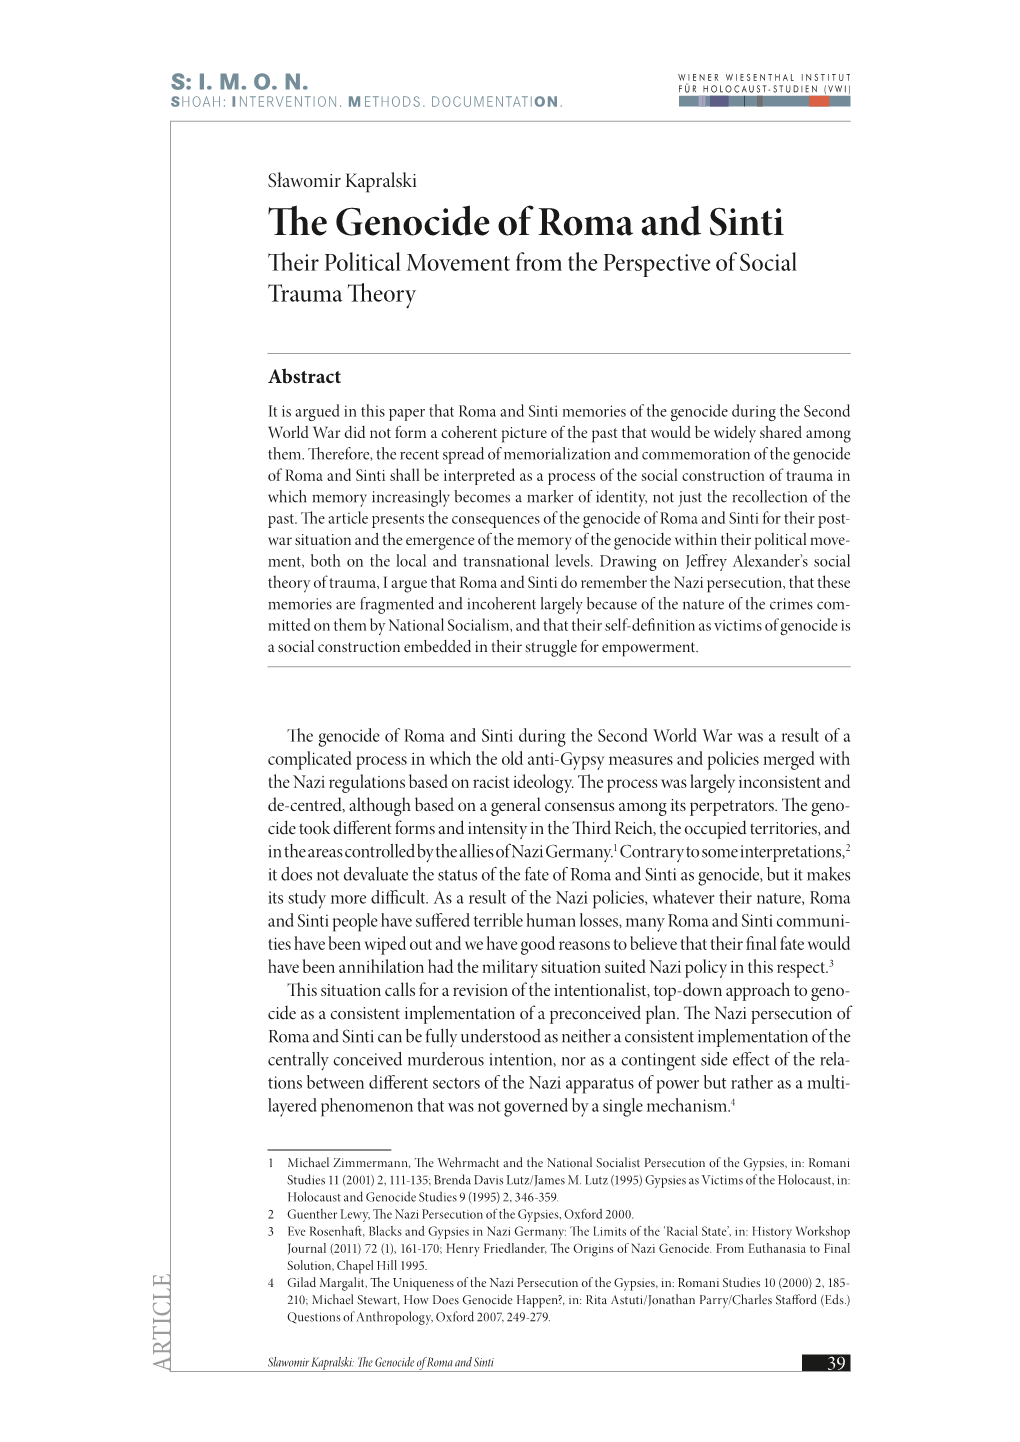 The Genocide of Roma and Sinti Their Political Movement from the Perspective of Social Trauma Theory